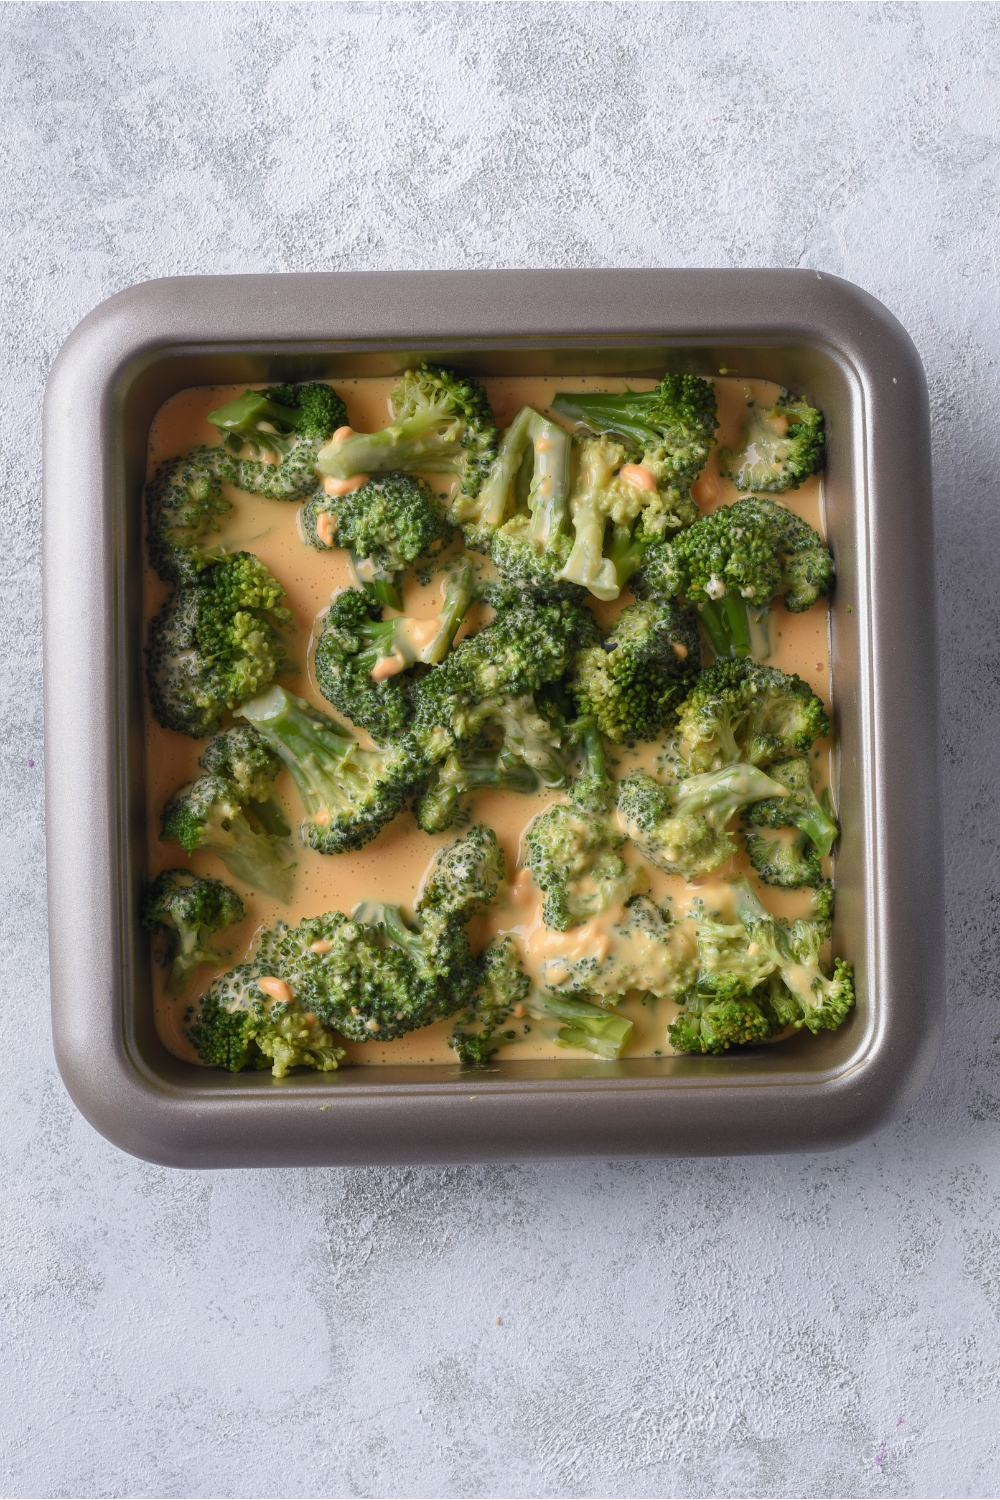 A baking dish filled with unbaked Velveeta cheese and broccoli casserole.